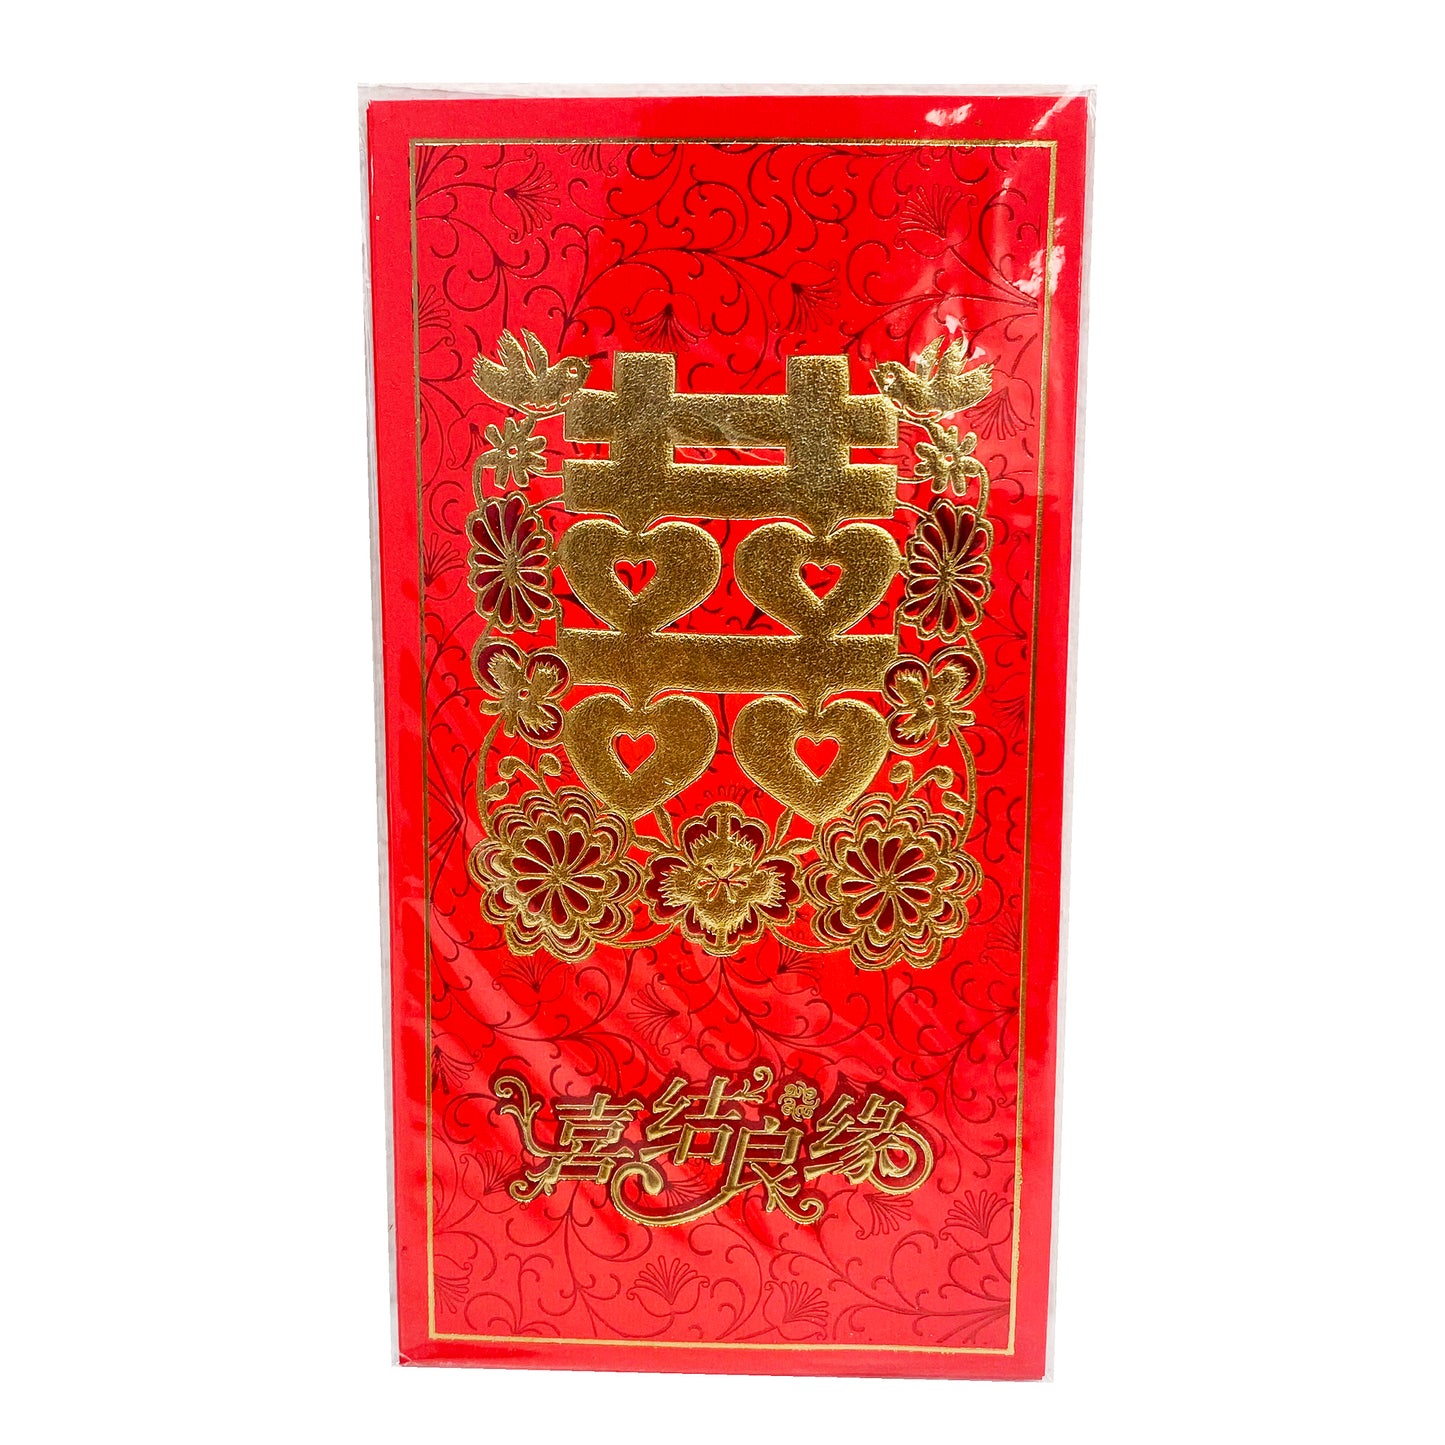 Front graphic image of Chinese Red Envelope Lucky Hong Bao Double Happiness with Flowers Long Size 6pcs